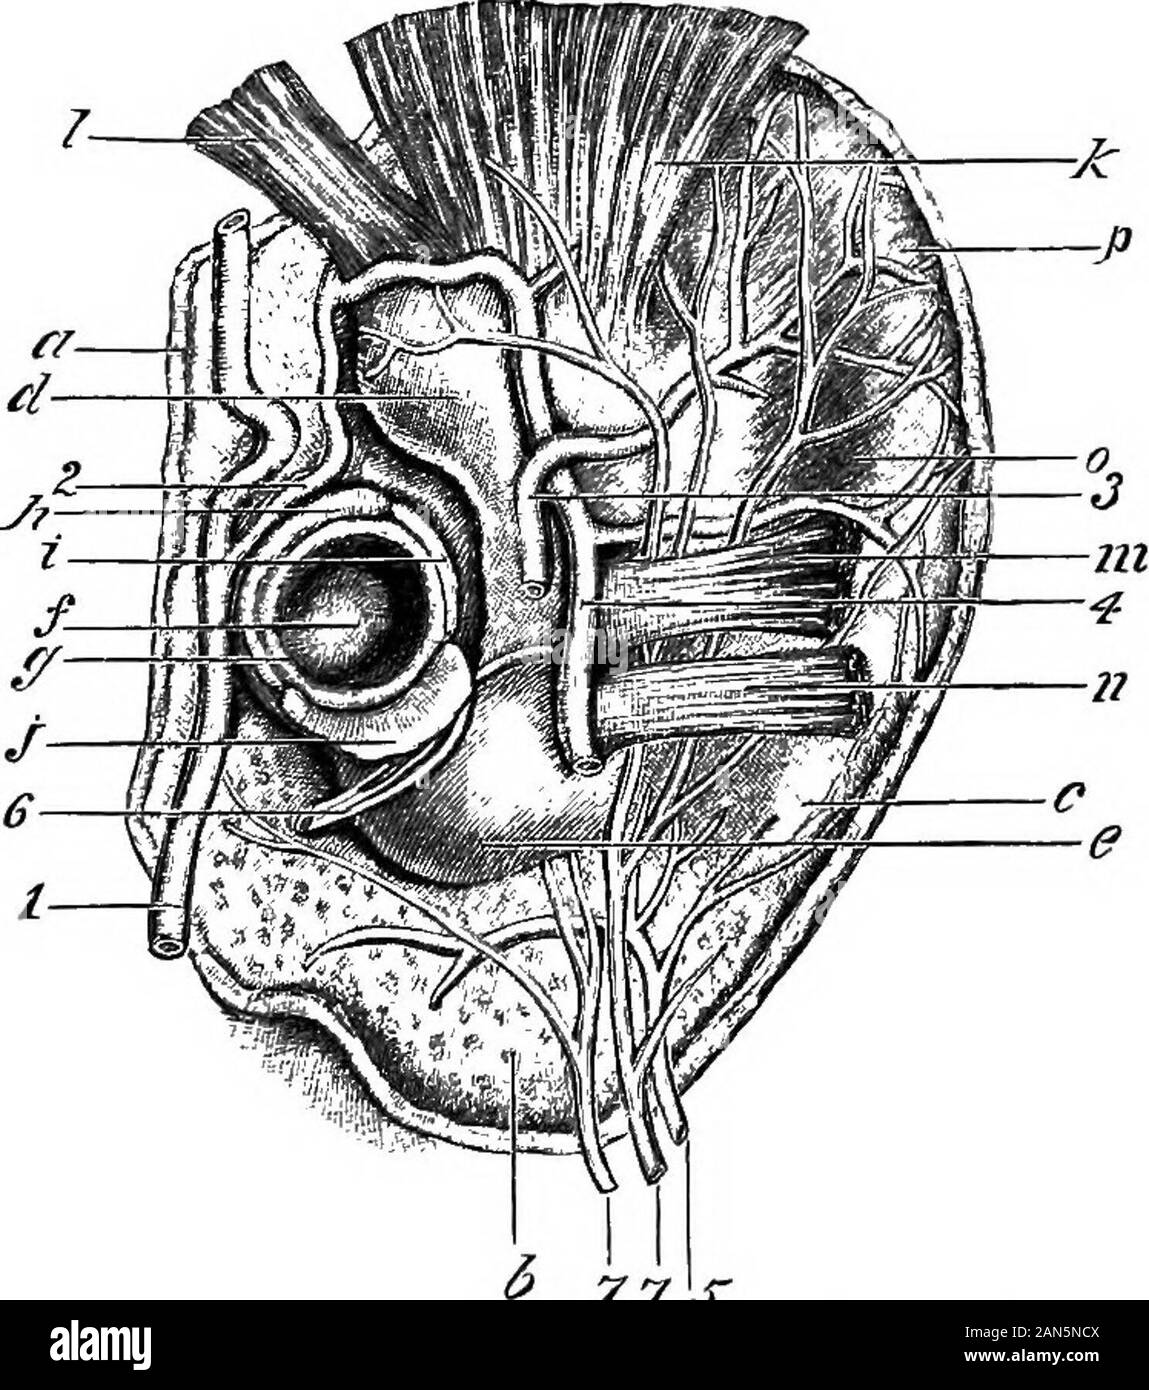 An illustrated encyclopædic medical dictionaryBeing a dictionary of the technical terms used by writers on medicine and the collateral sciences, in the Latin, English, French and German languages . THE EXTERNAL SURFACE OF THE AURICLE. (aPTBR bSrAUD.)a, spction of the skin ; b. cellular fatty tissue of the lol)ule, d, external opening of theauditory canal; e, the concha; /, the tragus; g, the antitragus; A, the. helix; t, the cavityof the he]iz;7, the antbelix; «,the two hranches of the antheliz ; /, the fossa of the anthe-1iz; m, the traincus muscle; n, the antitragicus mnscle; o, the great mu Stock Photo